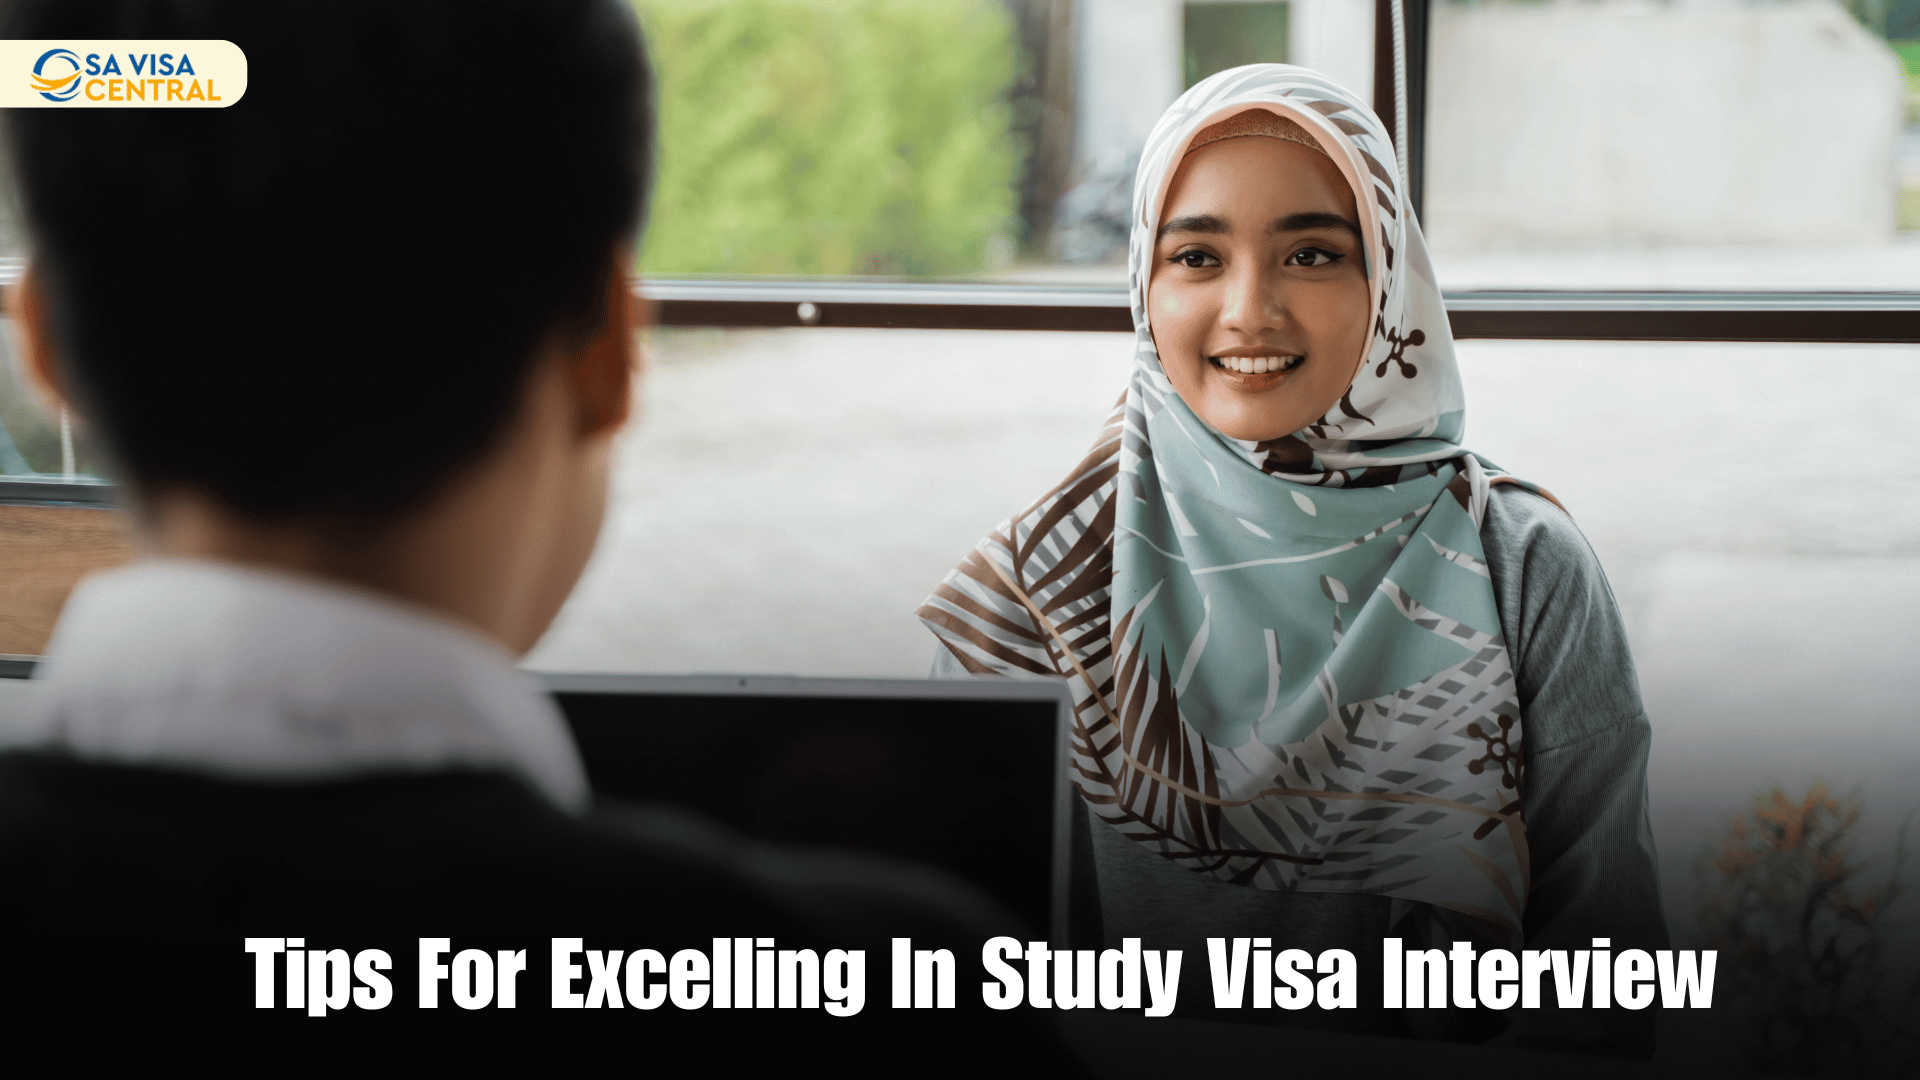 Study Visa Interview Tips: How to Prepare and Succeed